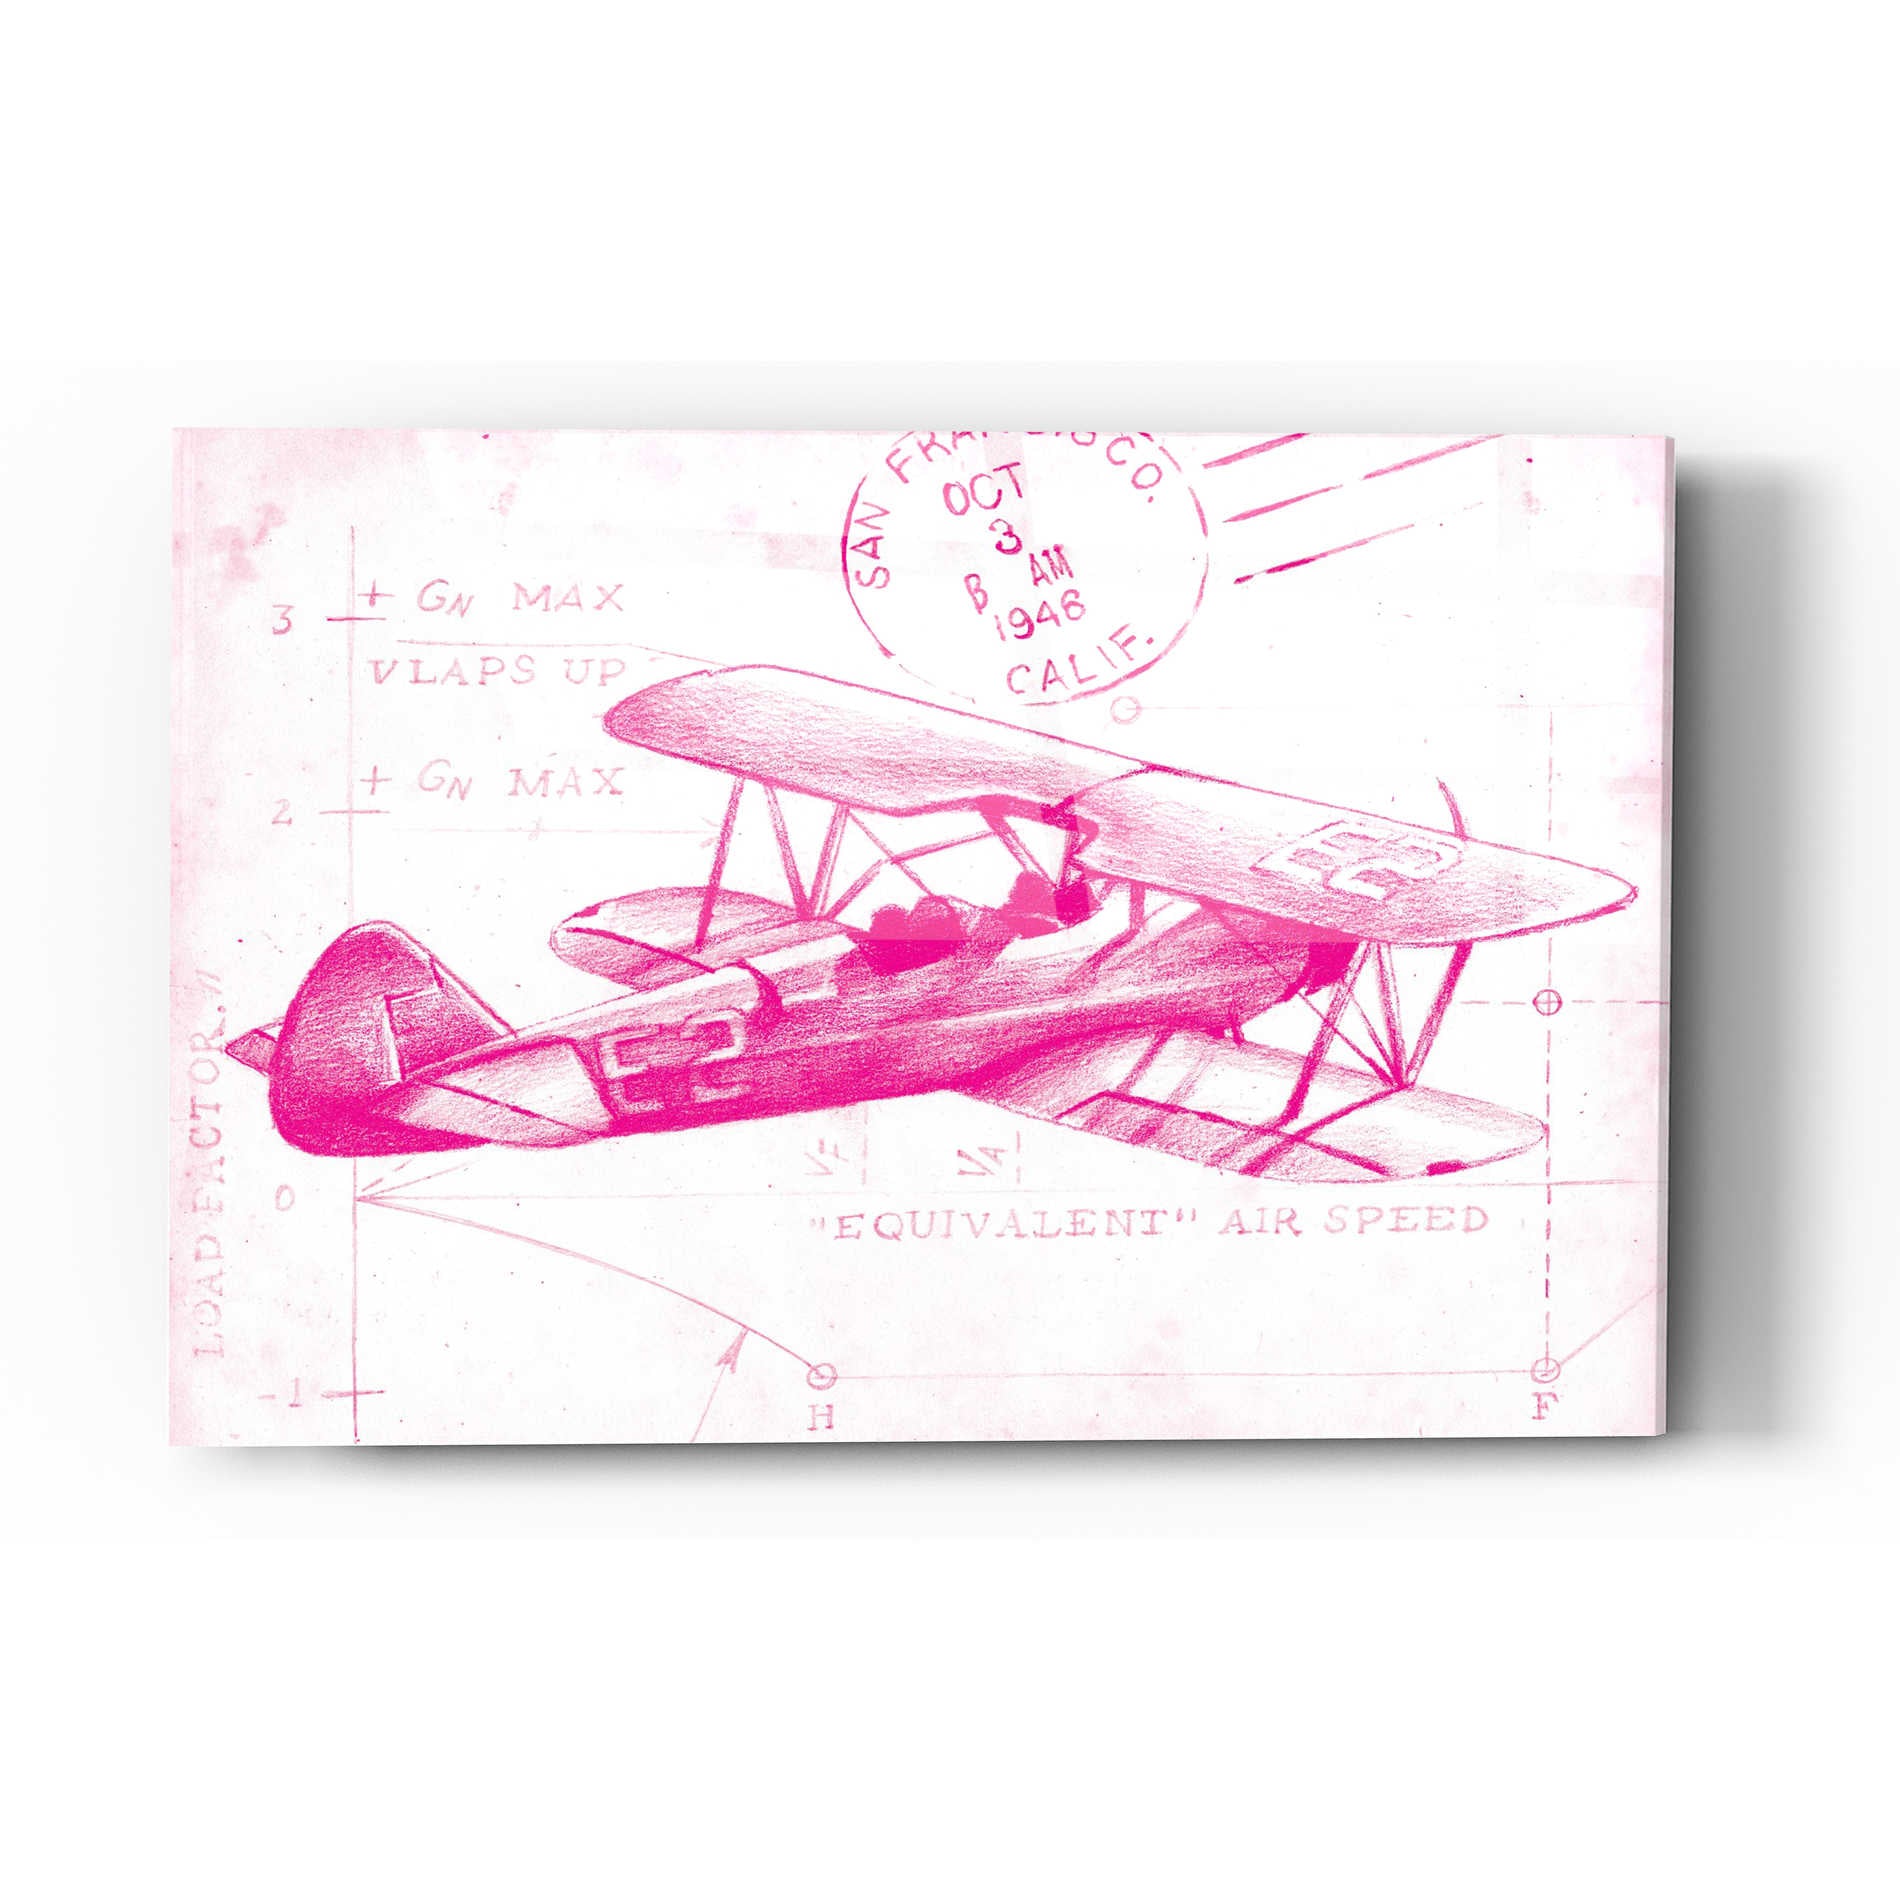 Epic Art 'Flight Schematic I in Pink' by Ethan Harper Acrylic Glass Wall Art,16x24